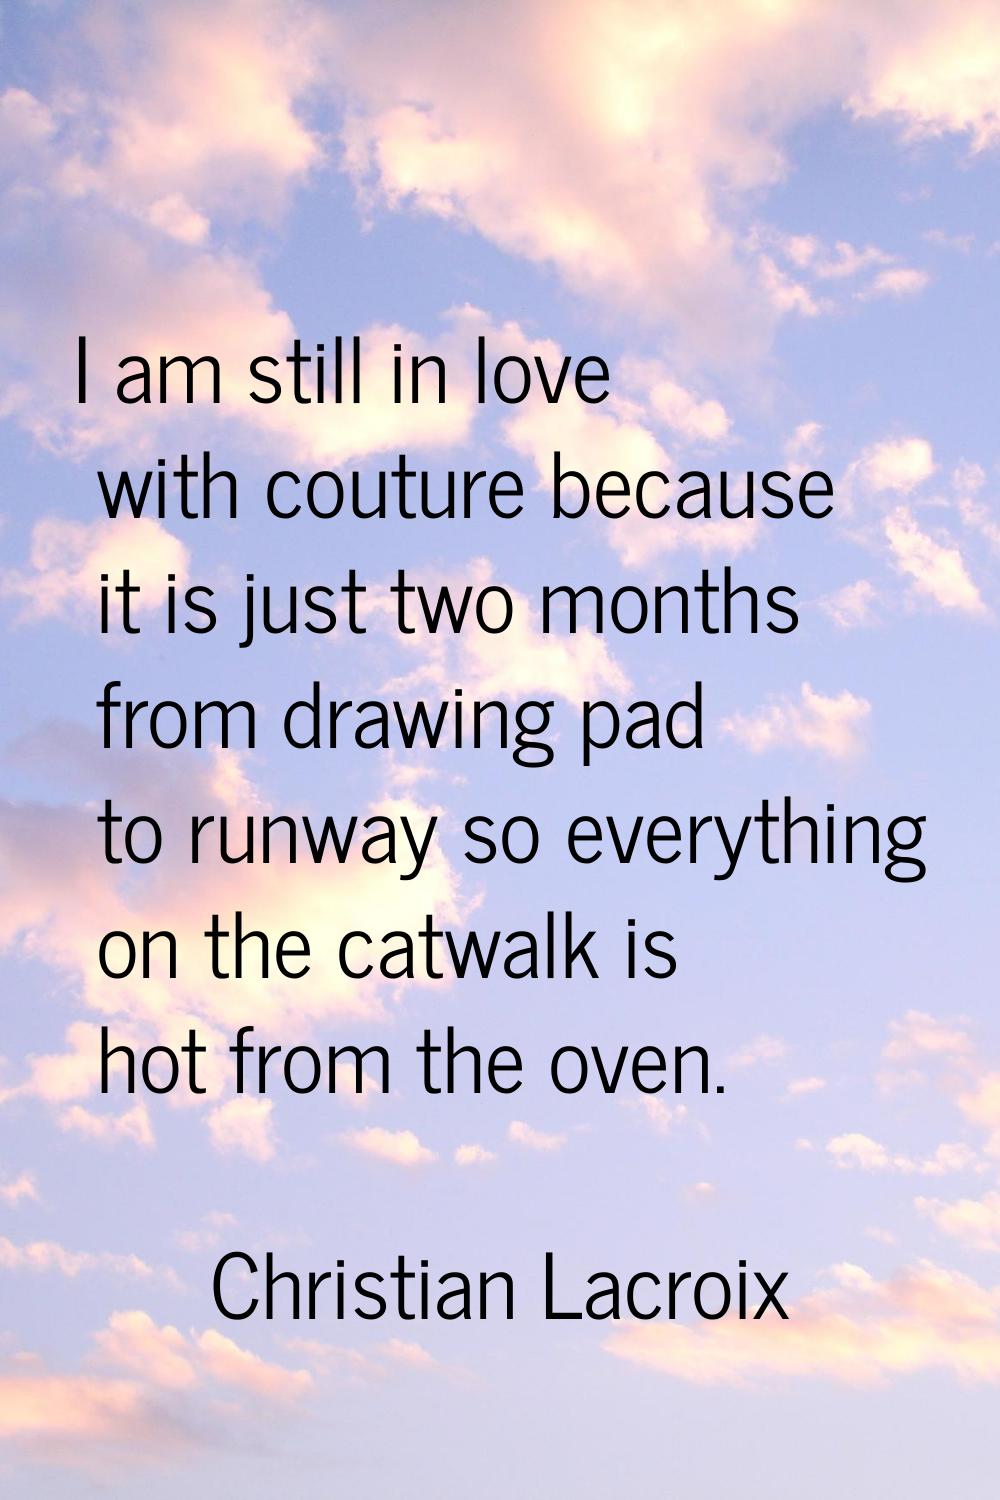 I am still in love with couture because it is just two months from drawing pad to runway so everyth